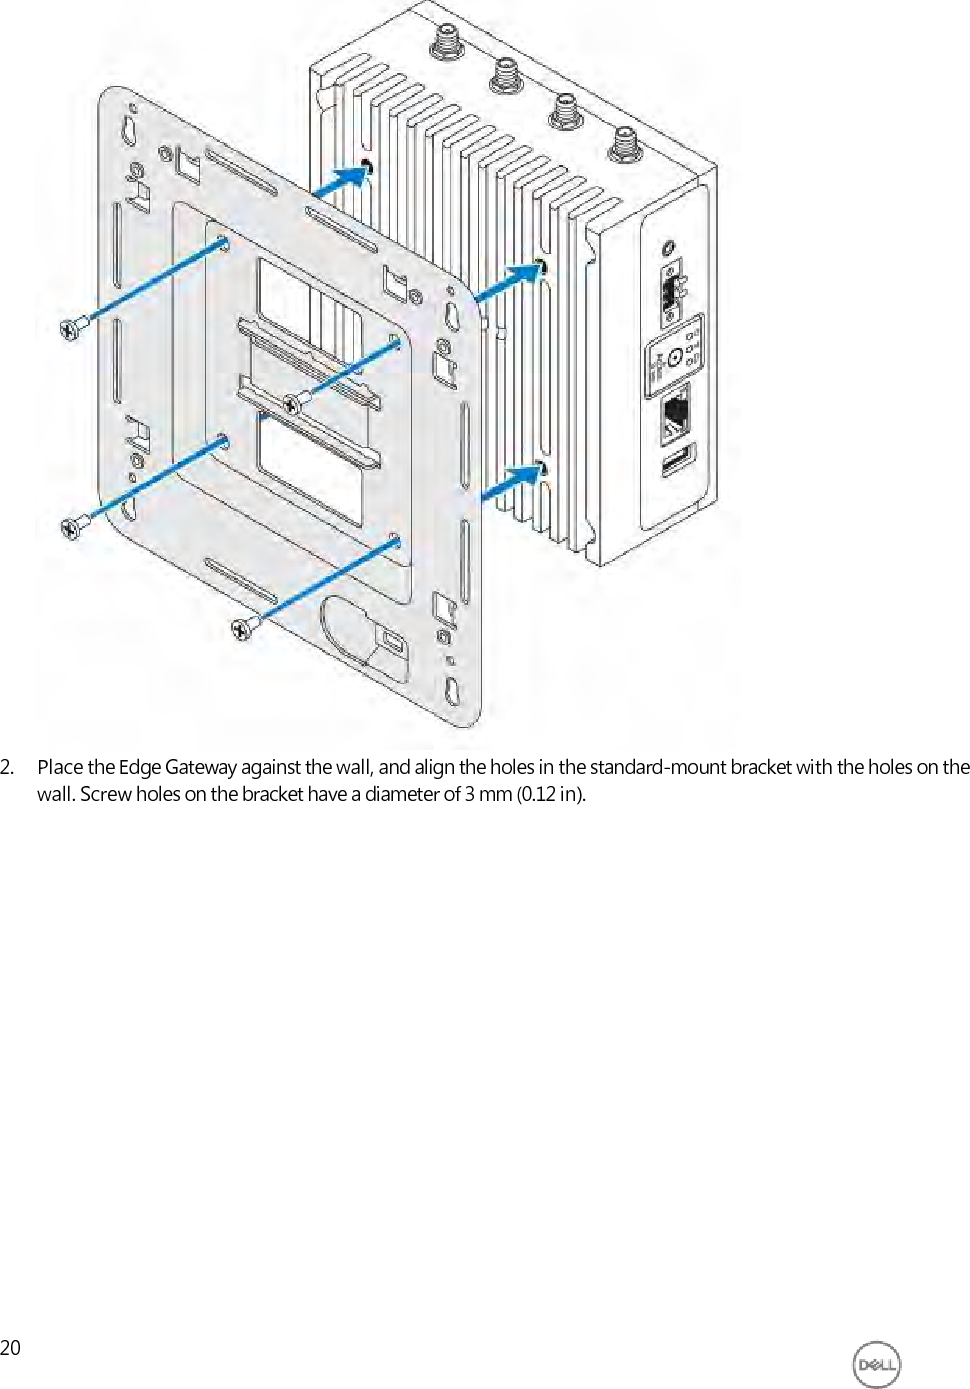                                    2. Place the Edge Gateway against the wall, and align the holes in the standard-mount bracket with the holes on the wall. Screw holes on the bracket have a diameter of 3 mm (0.12 in).                      20